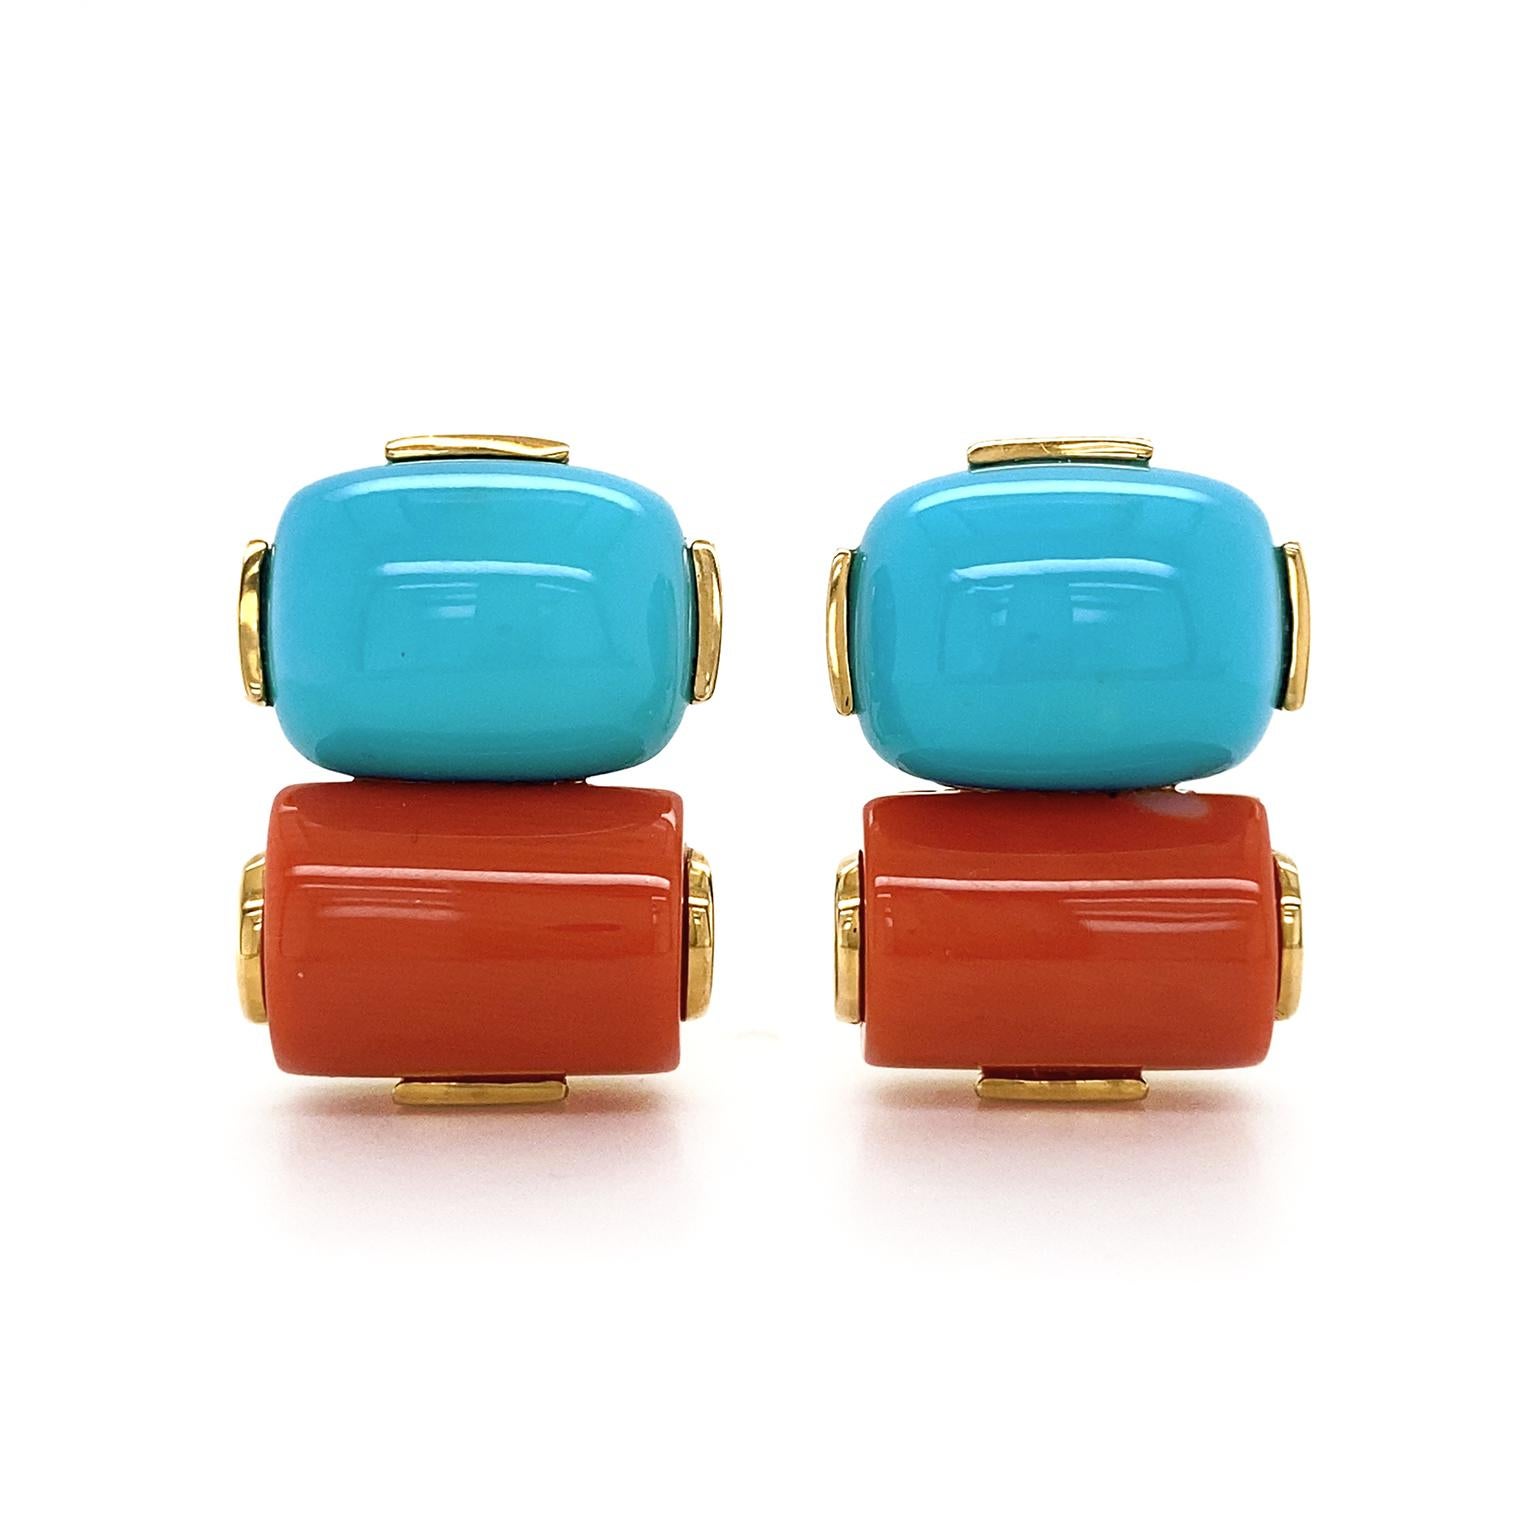 Boucles d'oreilles Sleeping Beauty turquoise rouge corail or jaune 18 carats Neuf - En vente à New York, NY